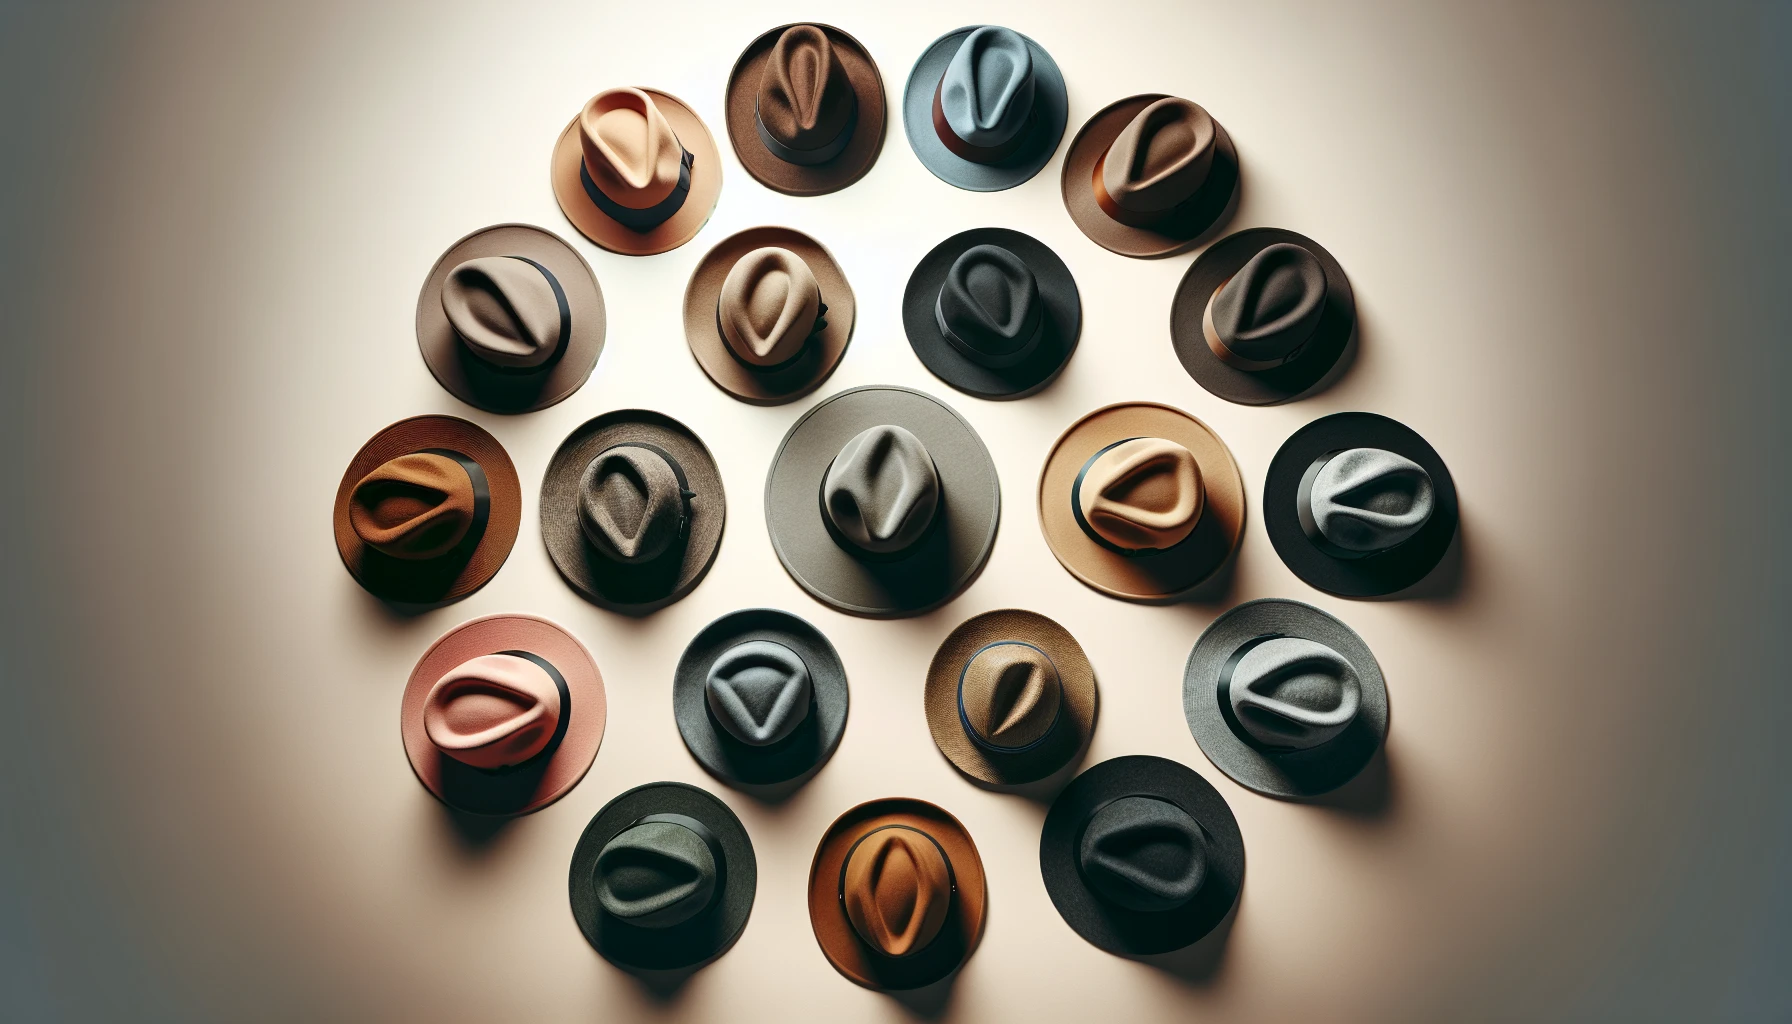 An illustration of different brim shapes for fedora hats